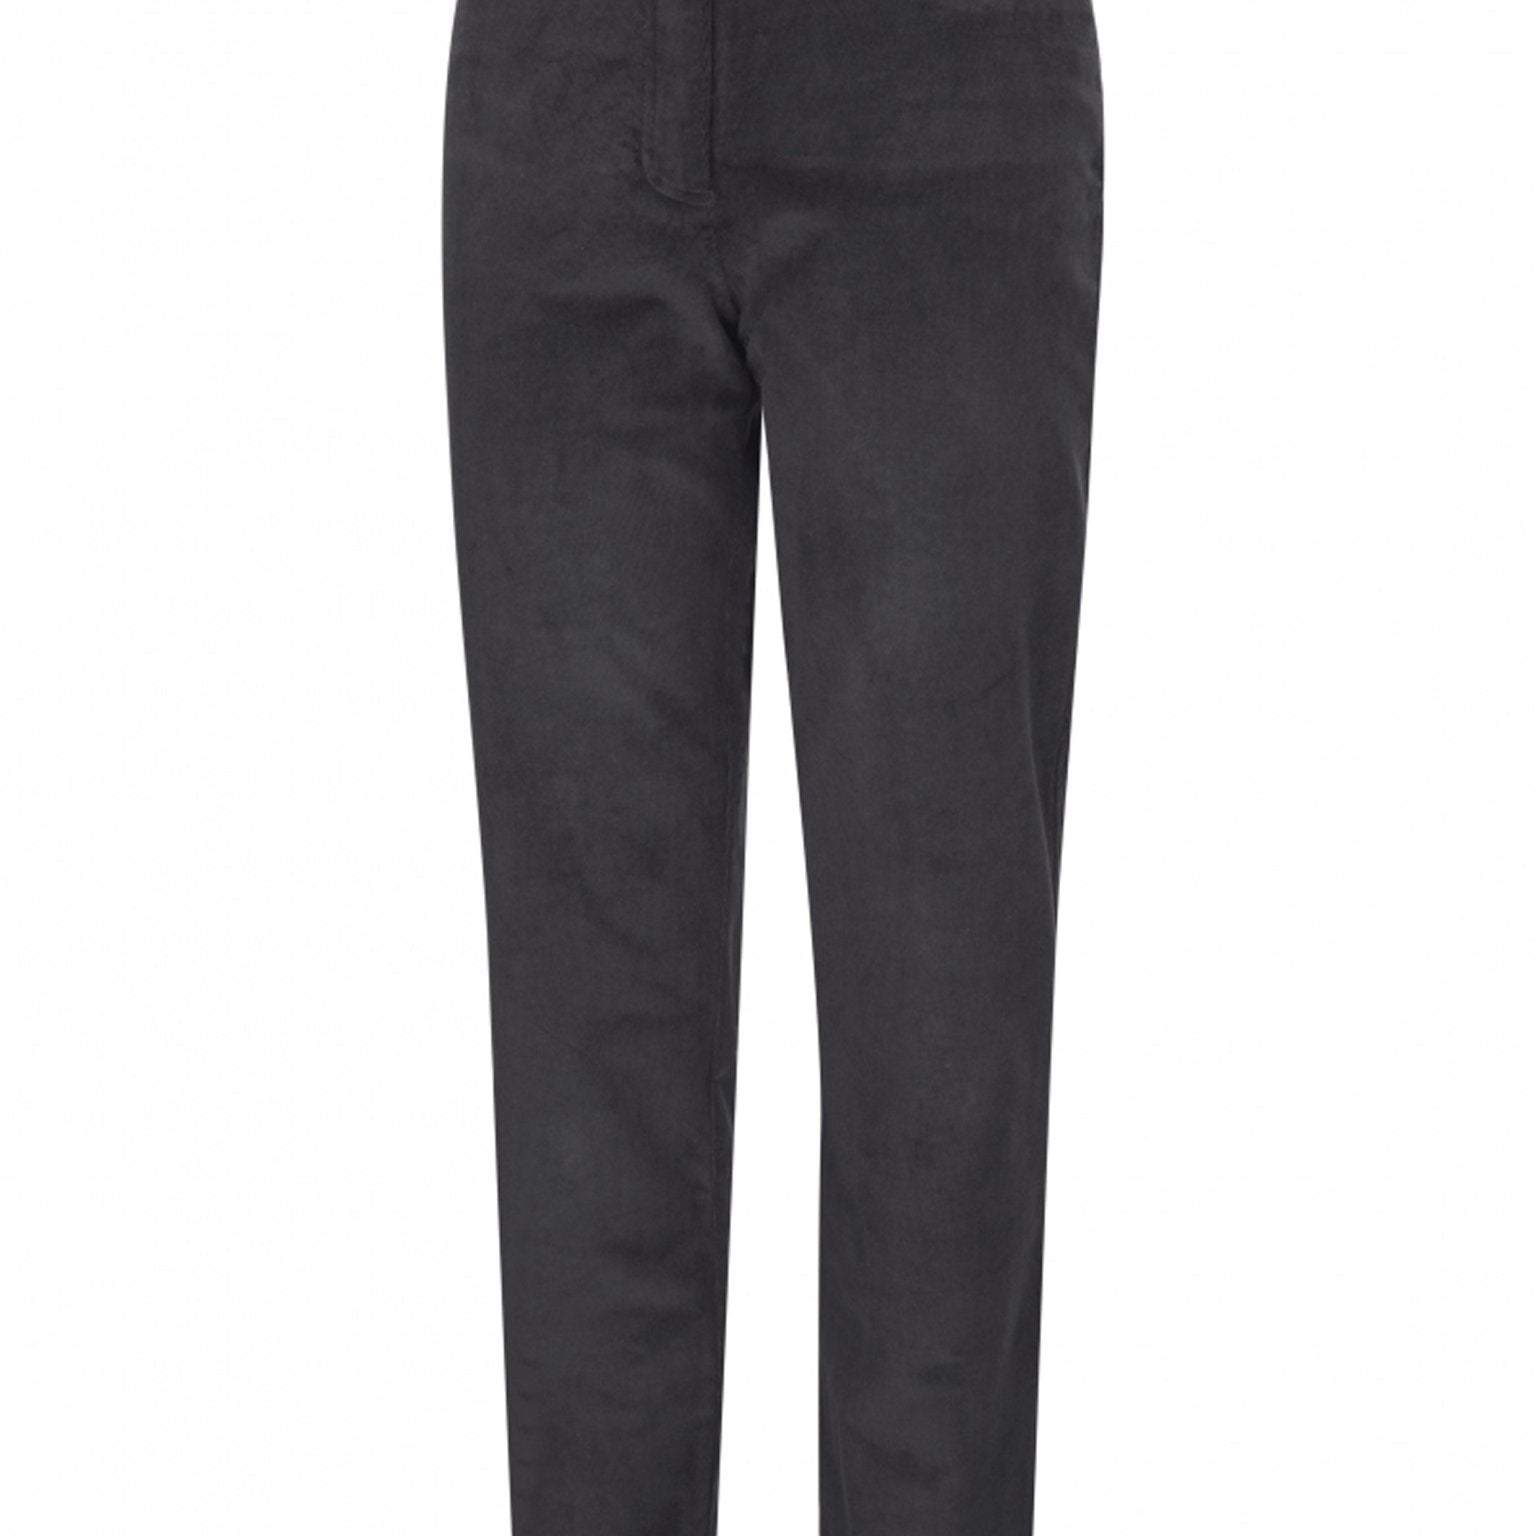 4elementsclothingHoggs of FifeHoggs of Fife - Ceres Ladies Cord Stretch Cord JeanTrousers & JeansCERE/GY/S08